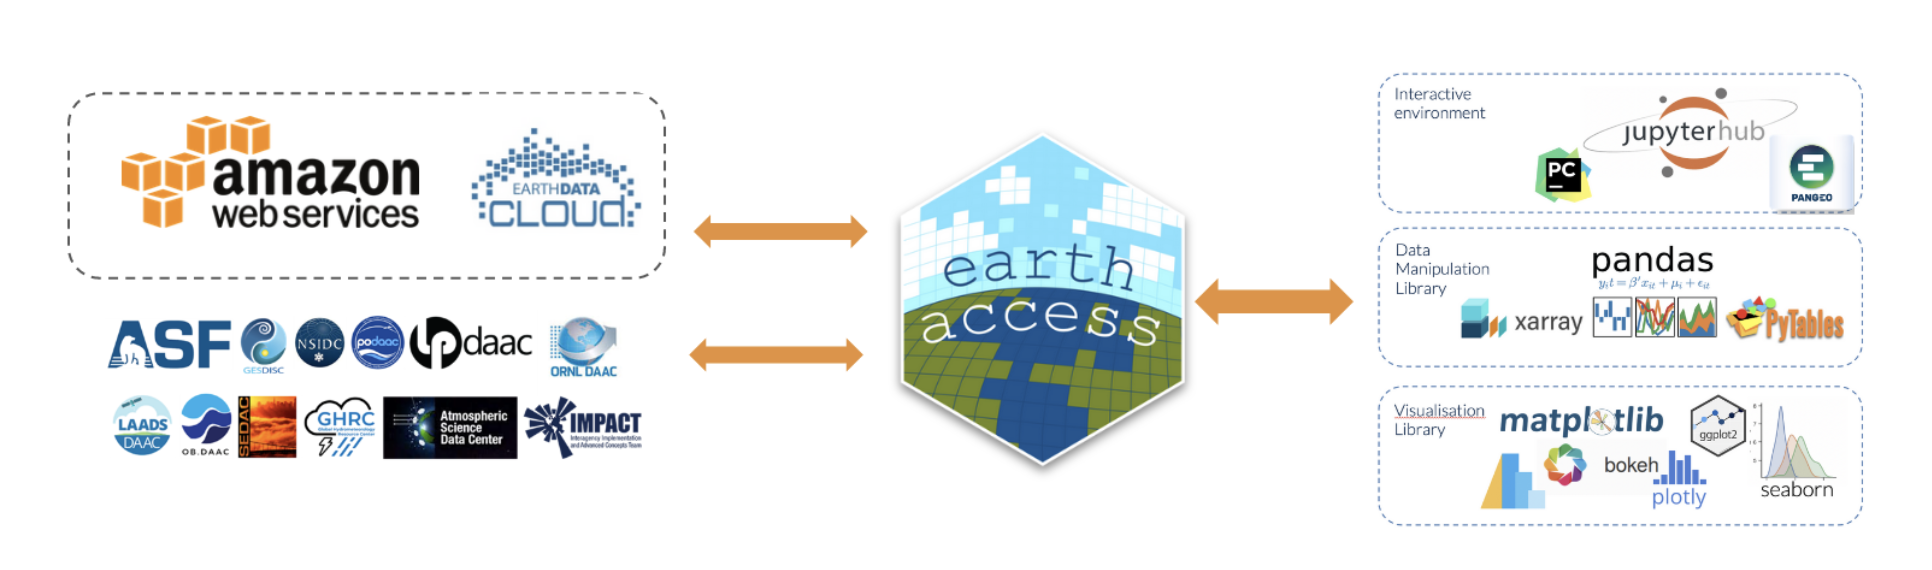 earthaccess hex sticker in center with 3 orange bidirectional arrows pointing to DAAC logos and AWS logo on left and open science community logos e.g. pandas, plotly, jupyterhub, pangeo on right